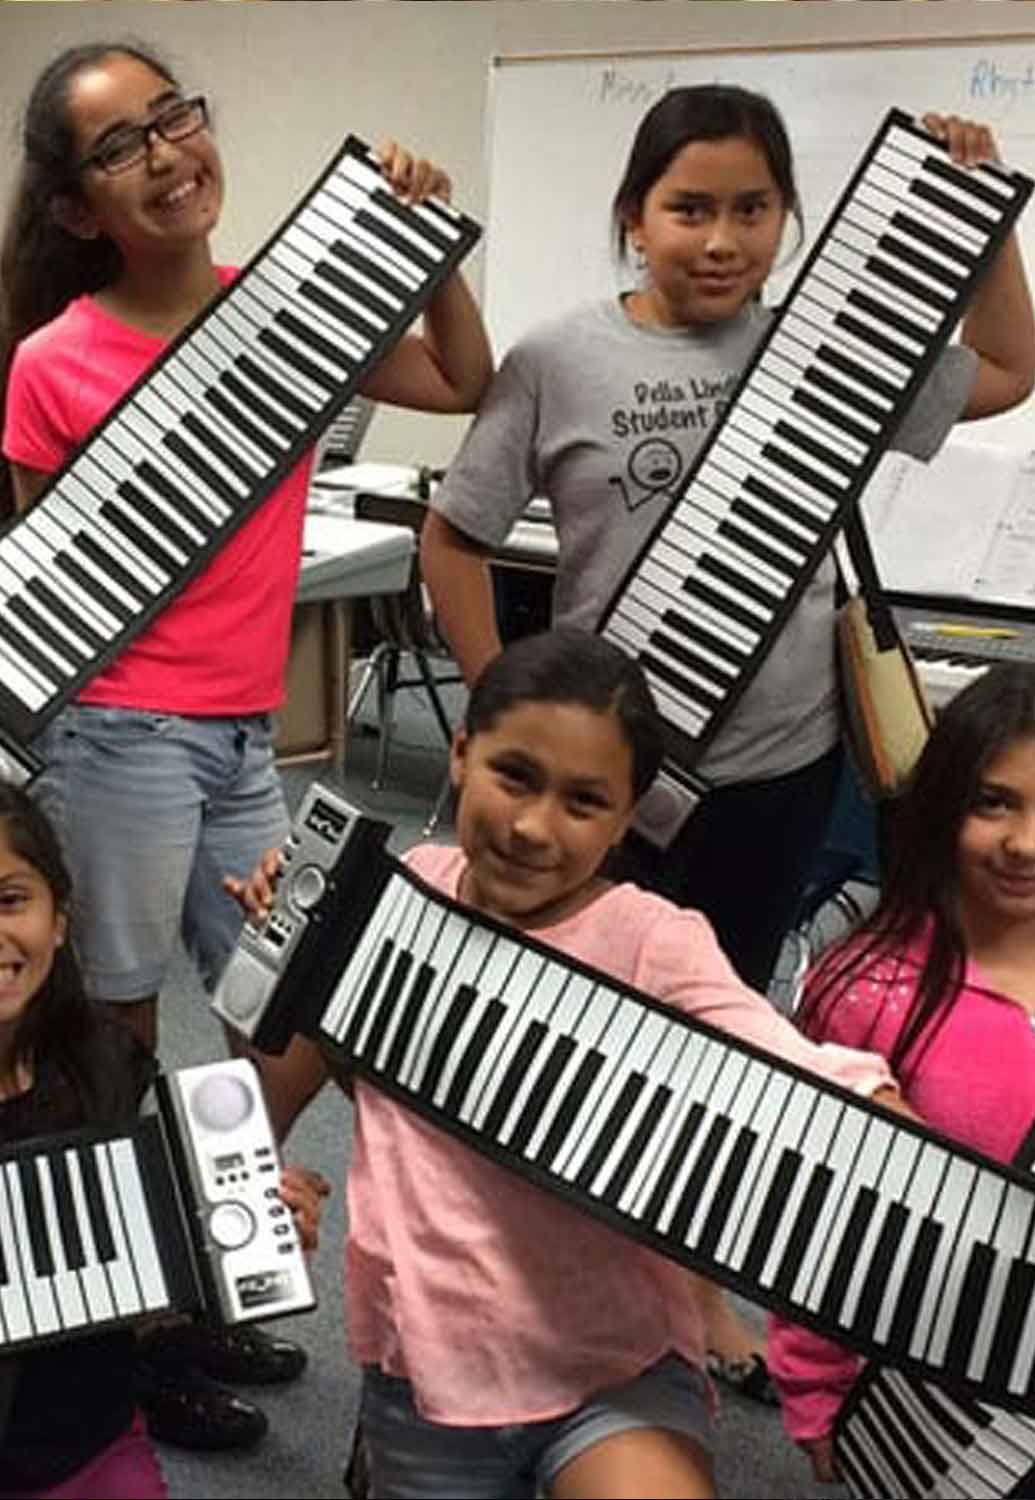 Girls holding piano keyboards in a class setting